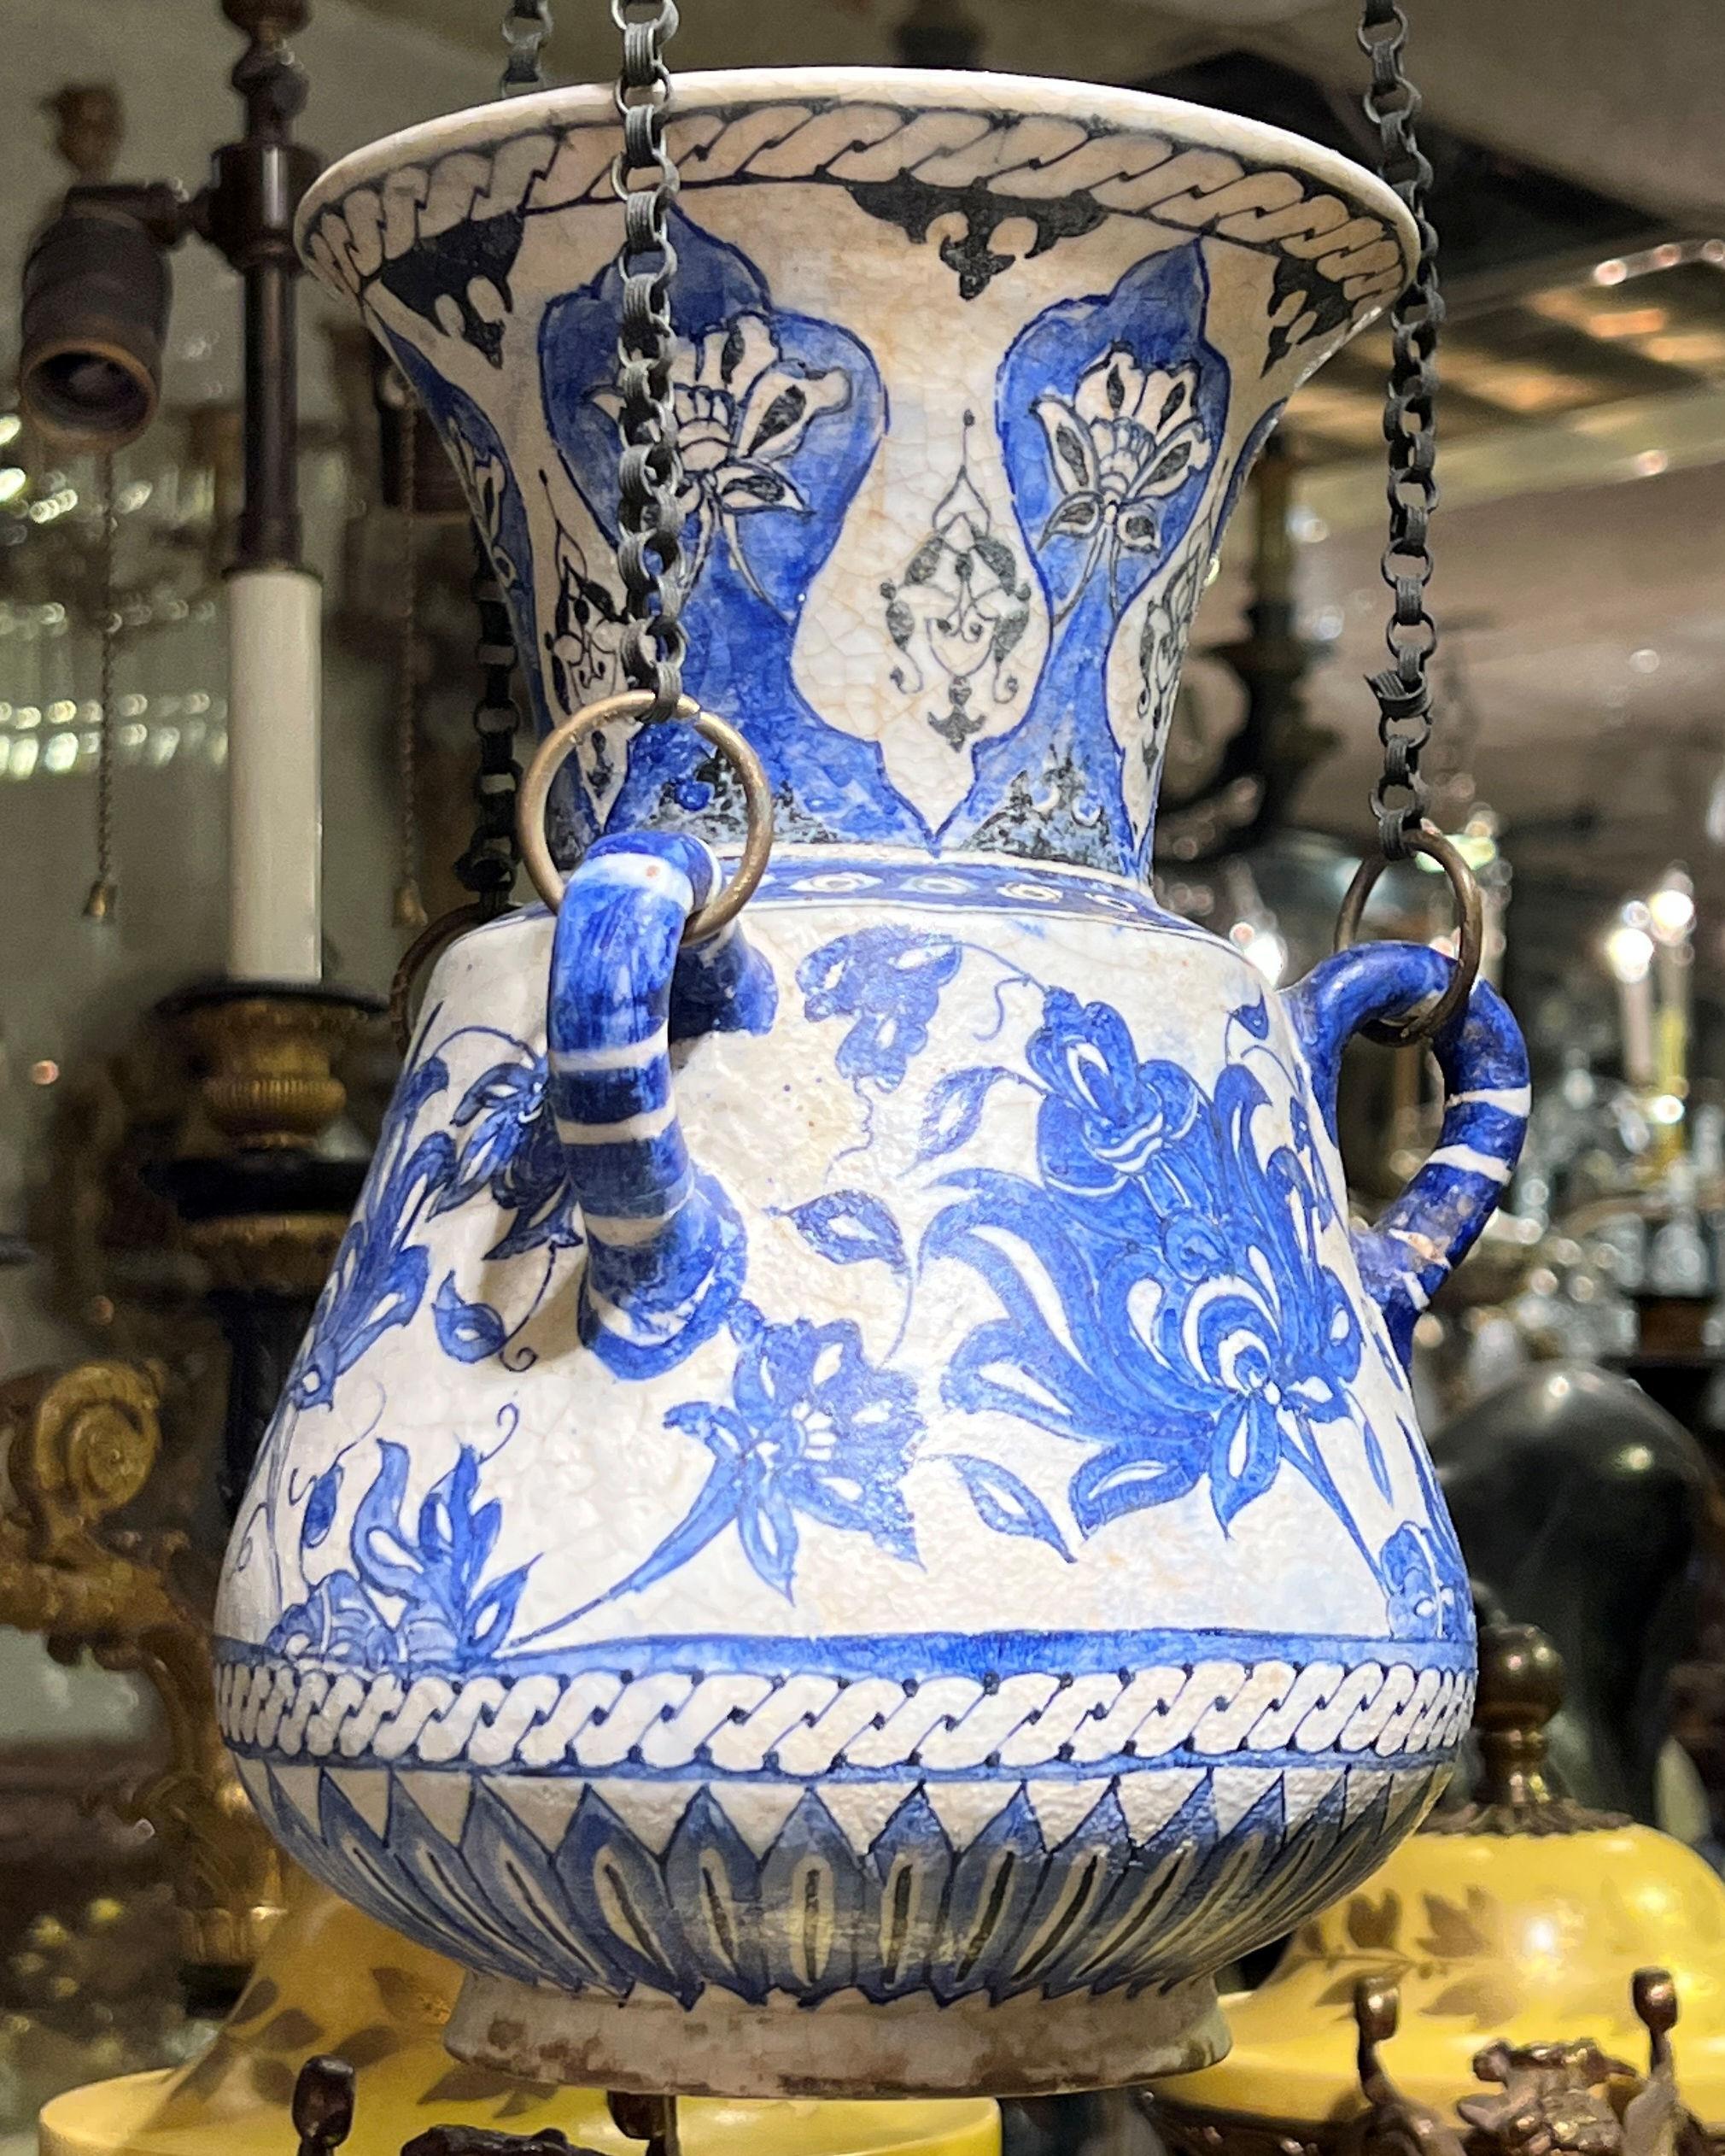 Very fine quality Middle Eastern blue and white ceramic Mosque lamp with original hardware chains.